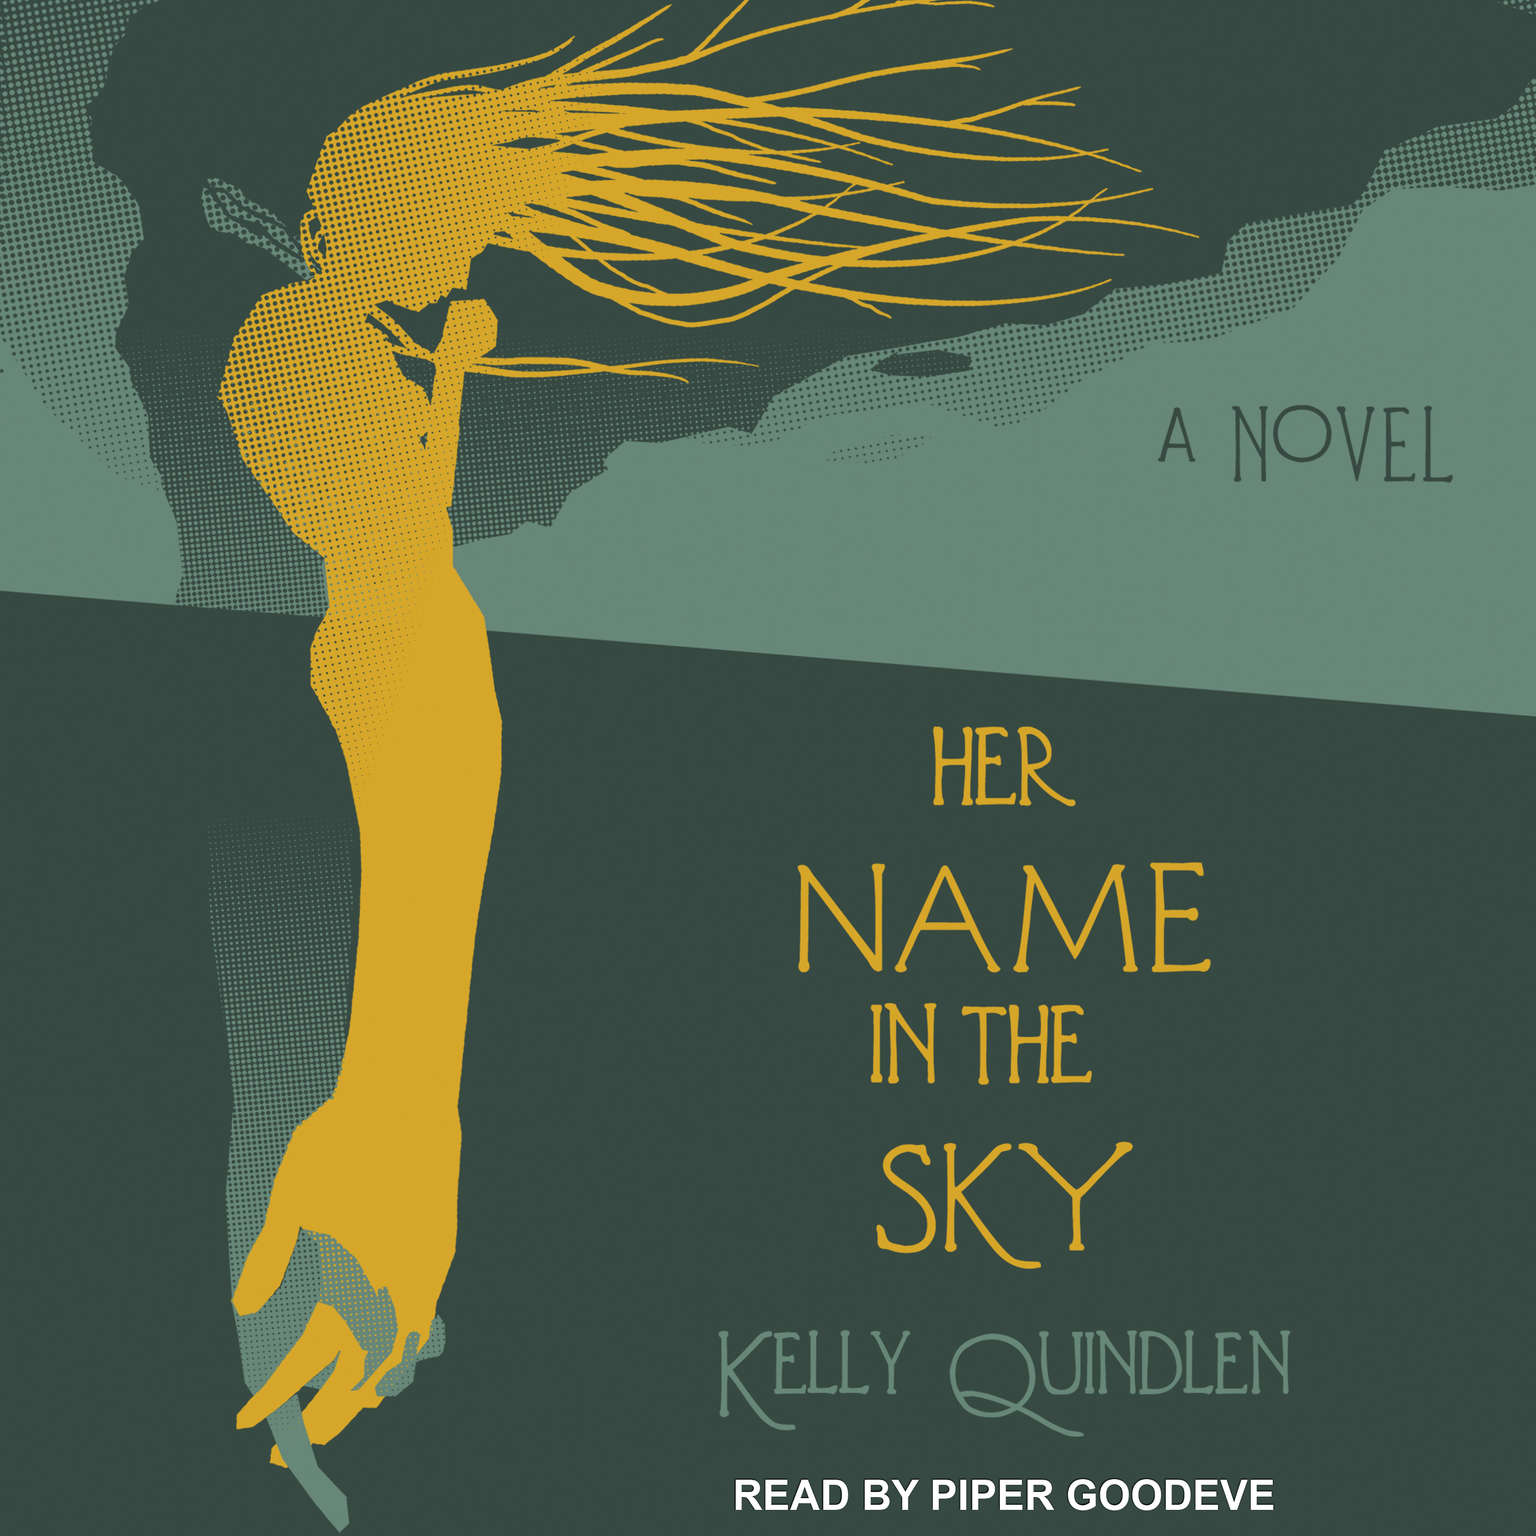 Kelly Quindlen: Her Name in the Sky (2014, CreateSpace Independent Publishing Platform)